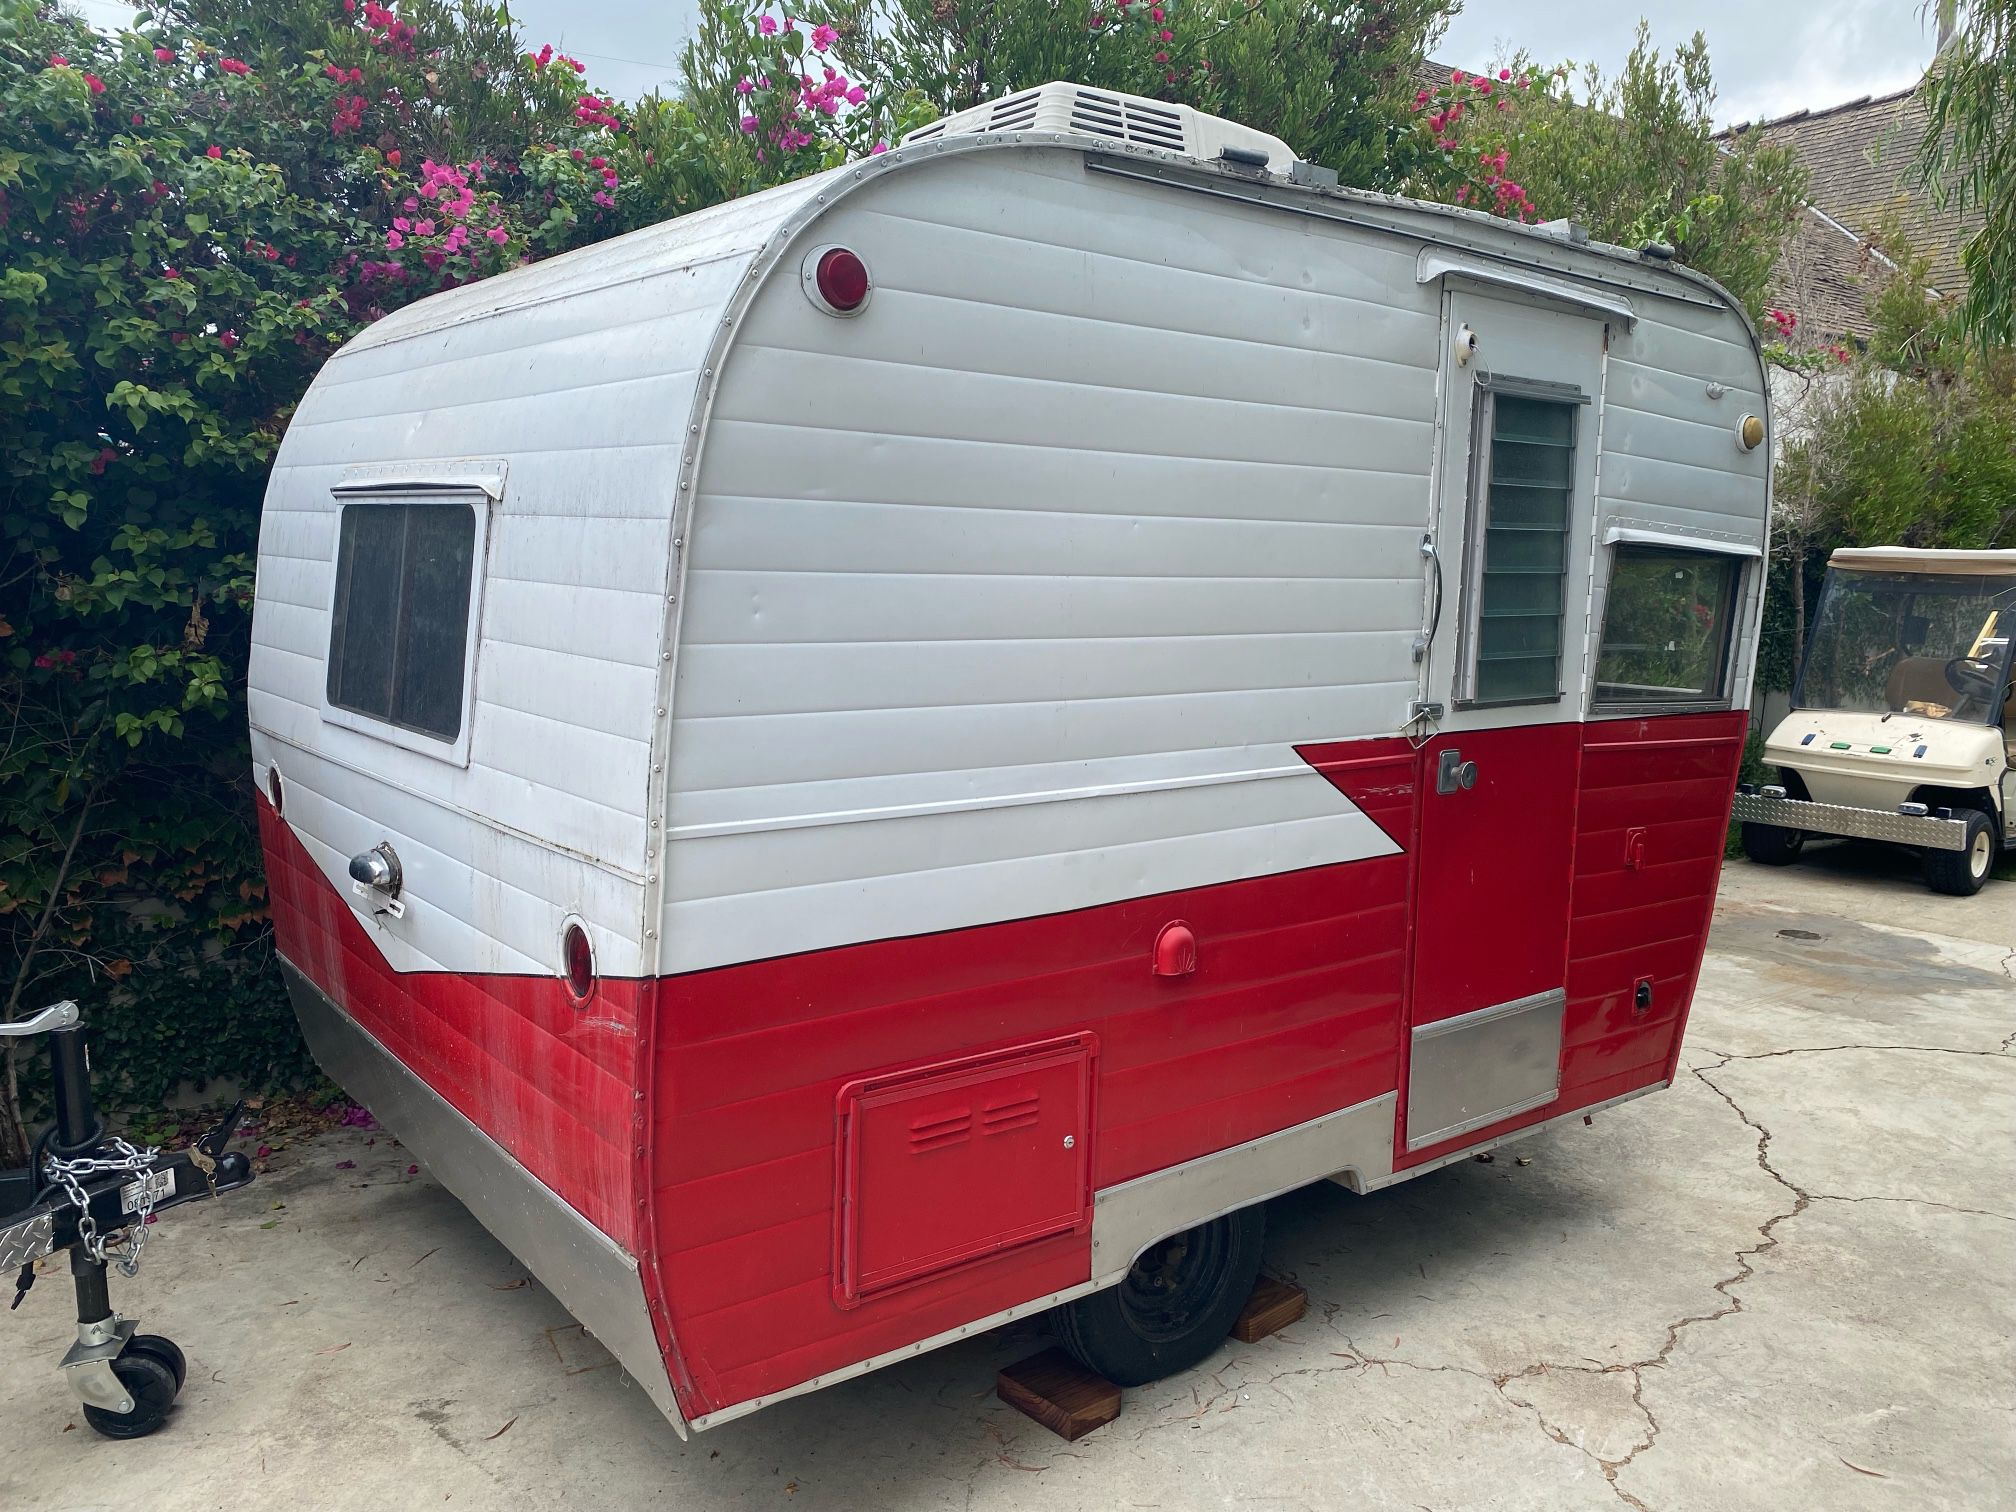 ADORABLE Vintage Canned Ham Trailer!! for Sale in Santa Ana, CA - OfferUp